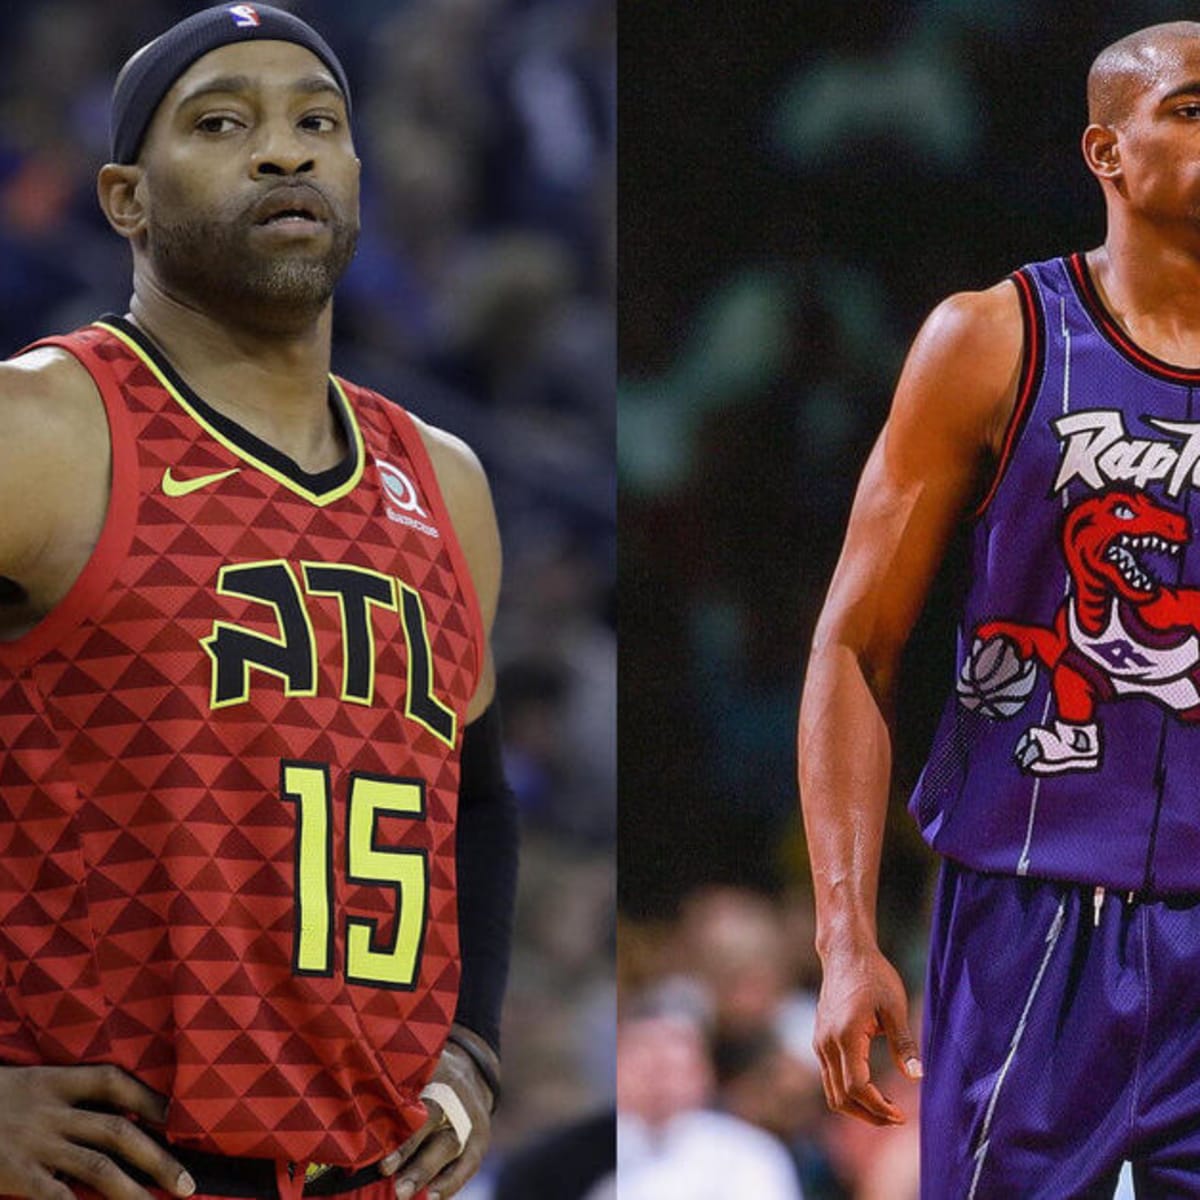 The Brooklyn Nets should absolutely retire Vince Carter's number